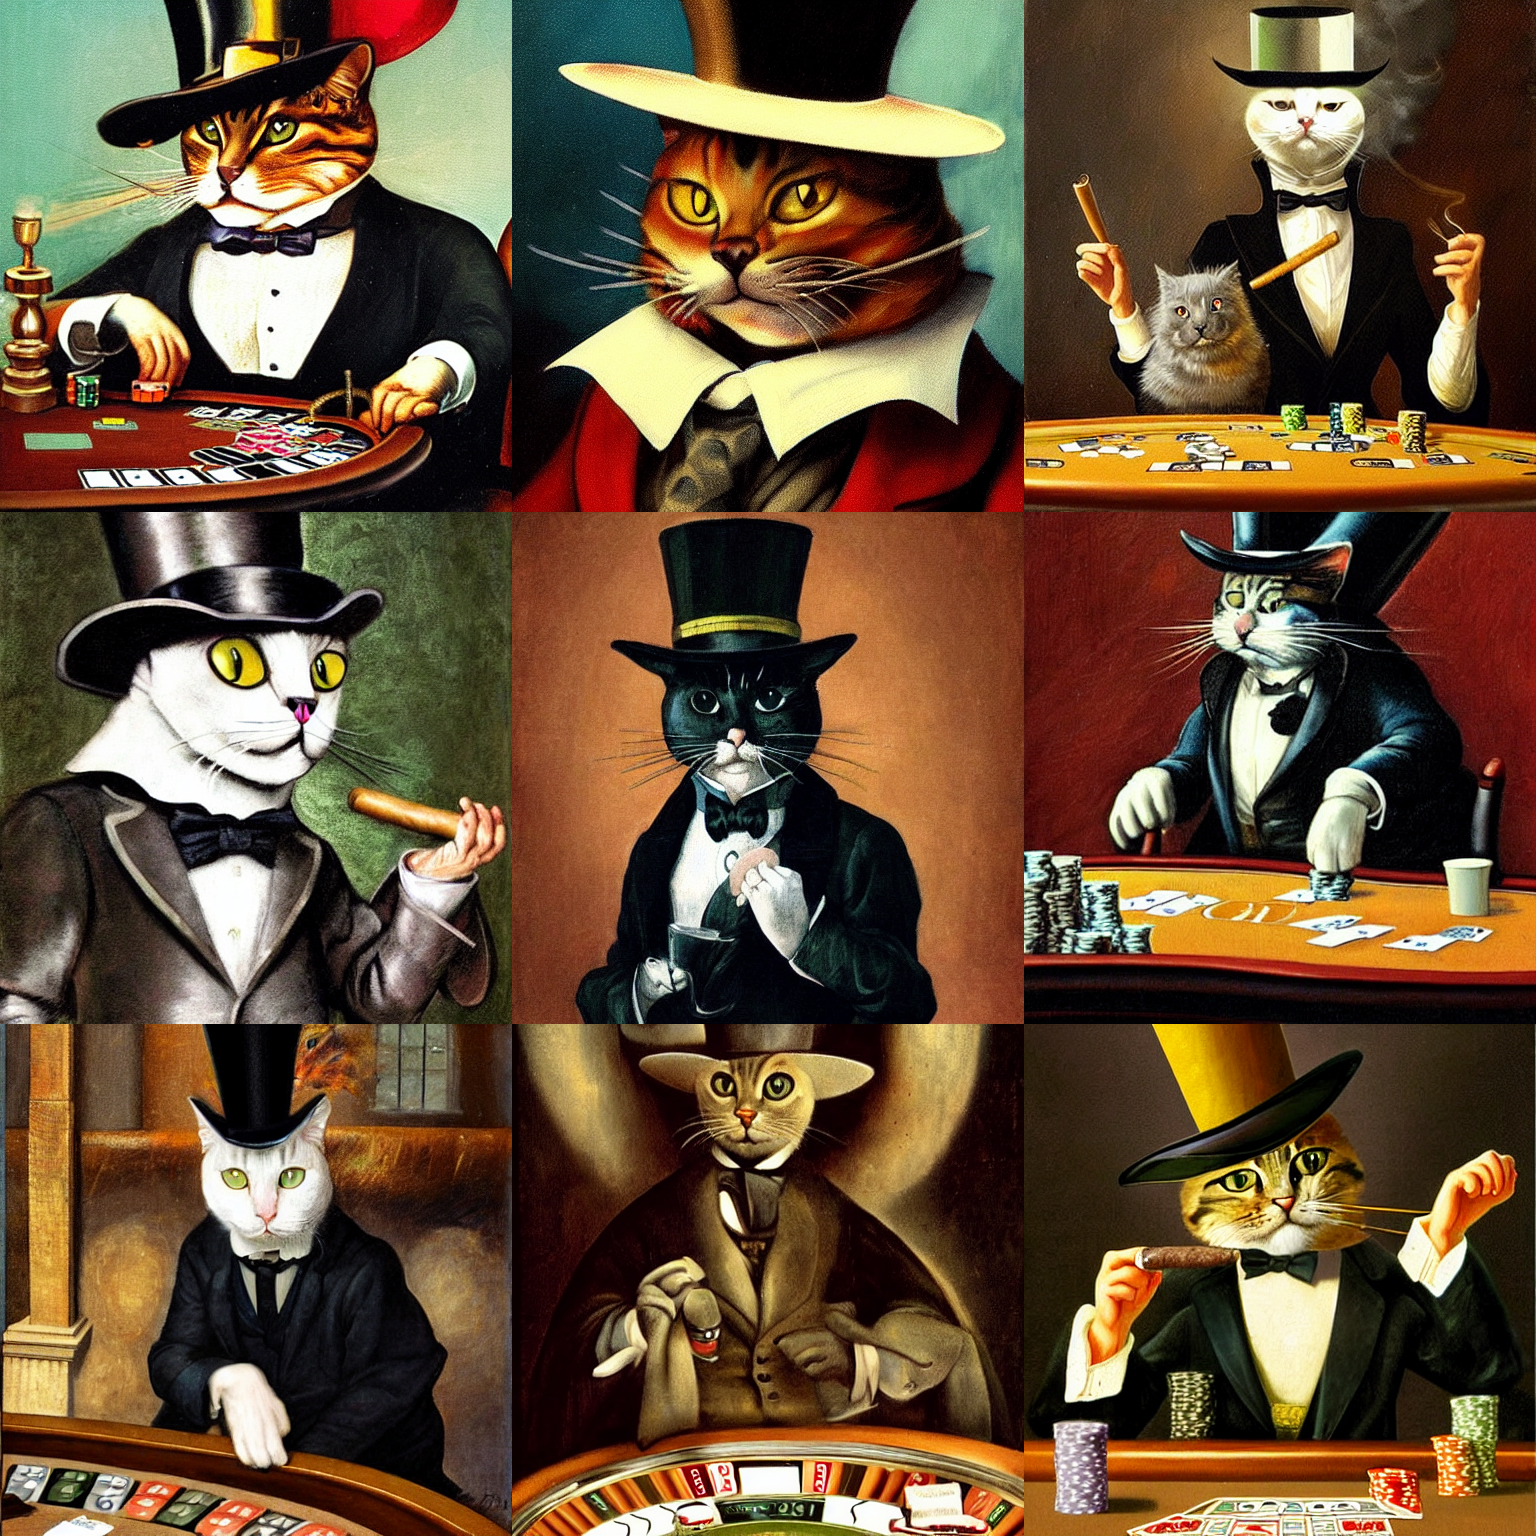 cat wearing a top hat and suit, smoking a cigar, inside a casino playing poker, hieronymus bosch, mark brooks